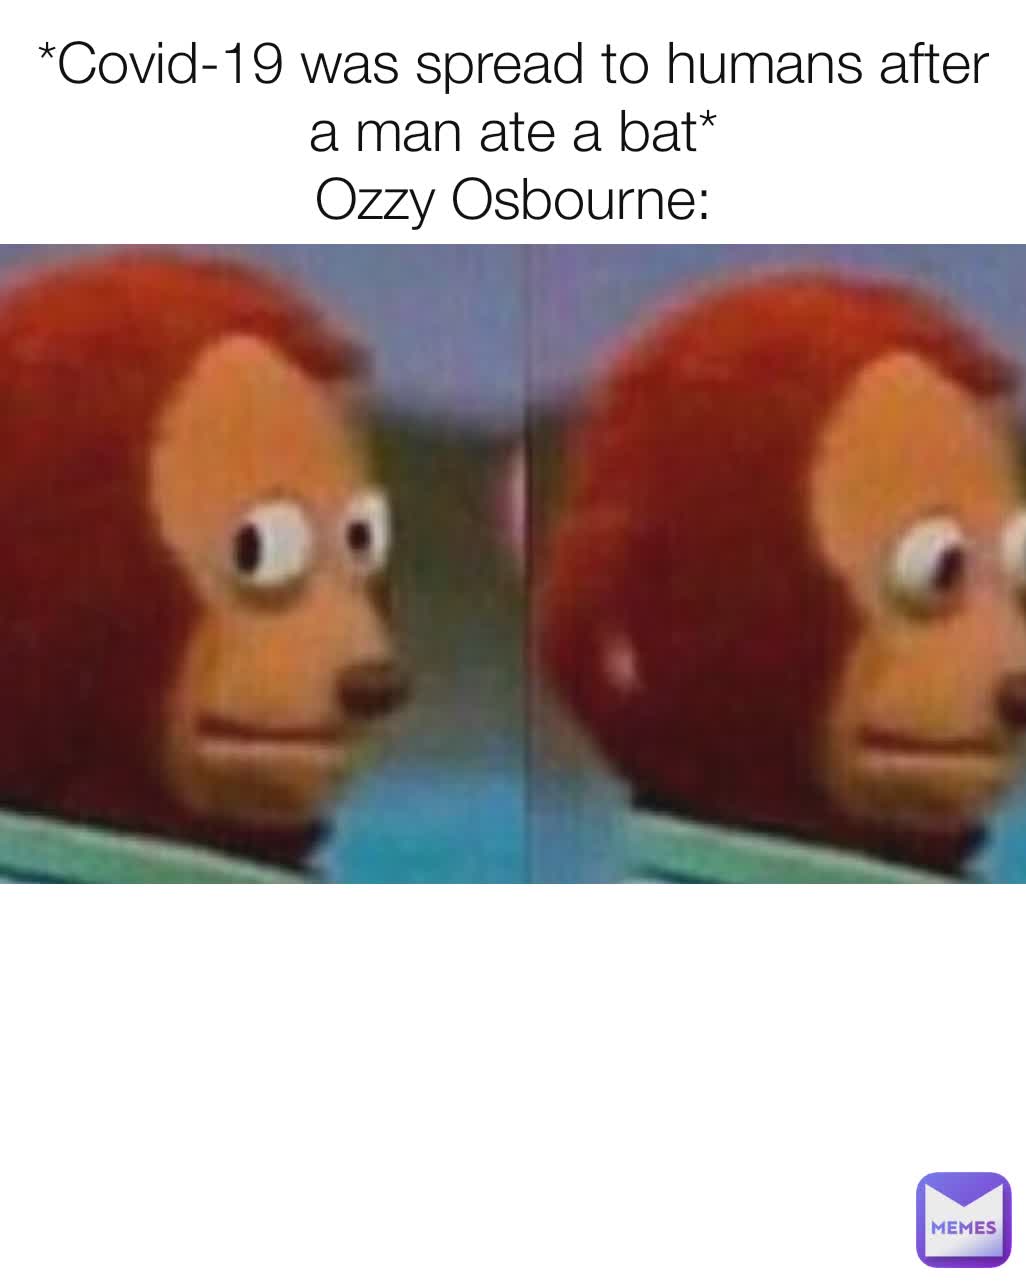 *Covid-19 was spread to humans after a man ate a bat*
Ozzy Osbourne: